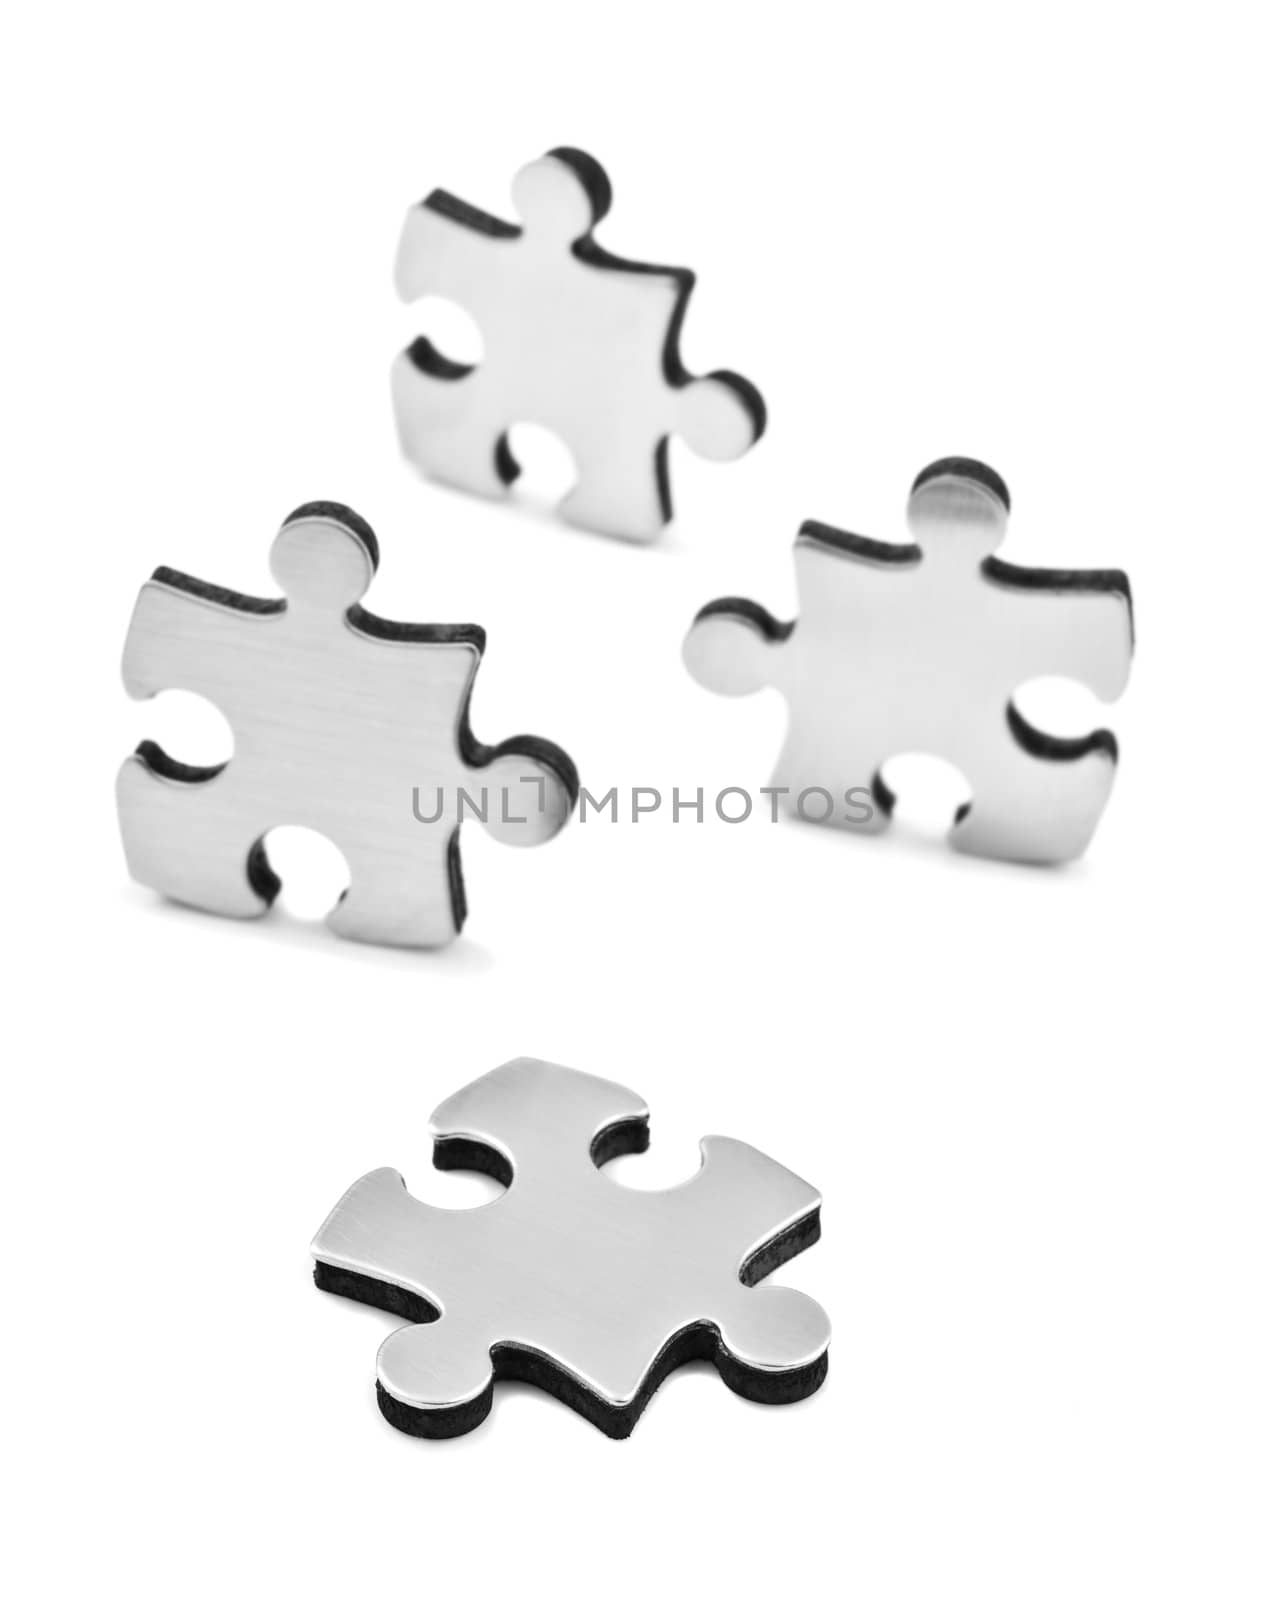 Stainless steel puzzles pieces on white background by tish1